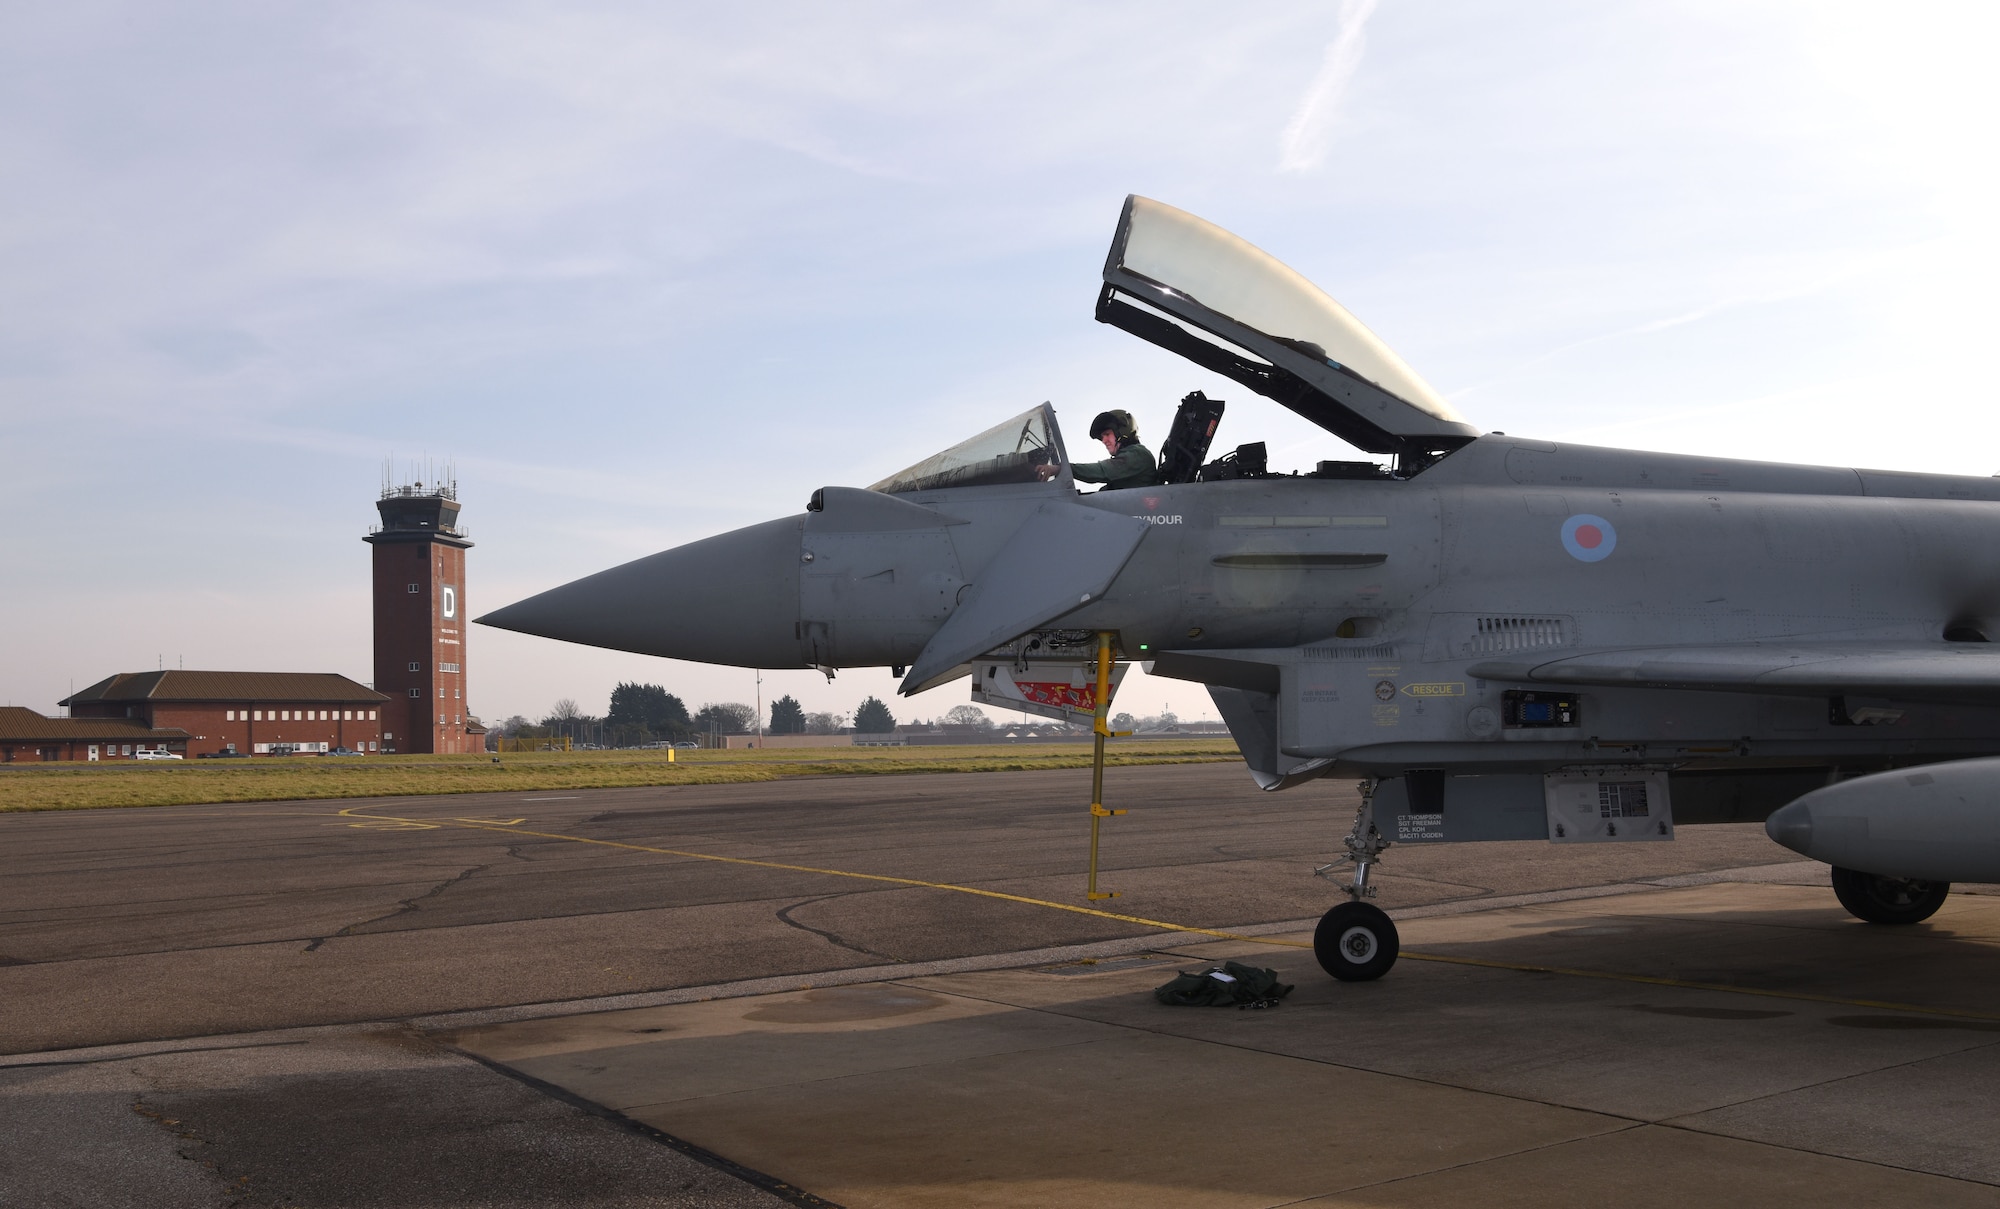 A Royal Air Force Eurofighter Typhoon FGR4 sits on the taxiway as its pilot does pre-checks prior to take-off at Royal Air Force Mildenhall, England, Feb. 15, 2023. The aircraft from RAF Coningsby, England, diverted here due to bad weather. The Typhoon is a highly capable and extremely agile multi-role combat aircraft, capable of being deployed for the full spectrum of air operations, including air policing, peace support and high-intensity conflict. (U.S. Air Force photo by Karen Abeyasekere)